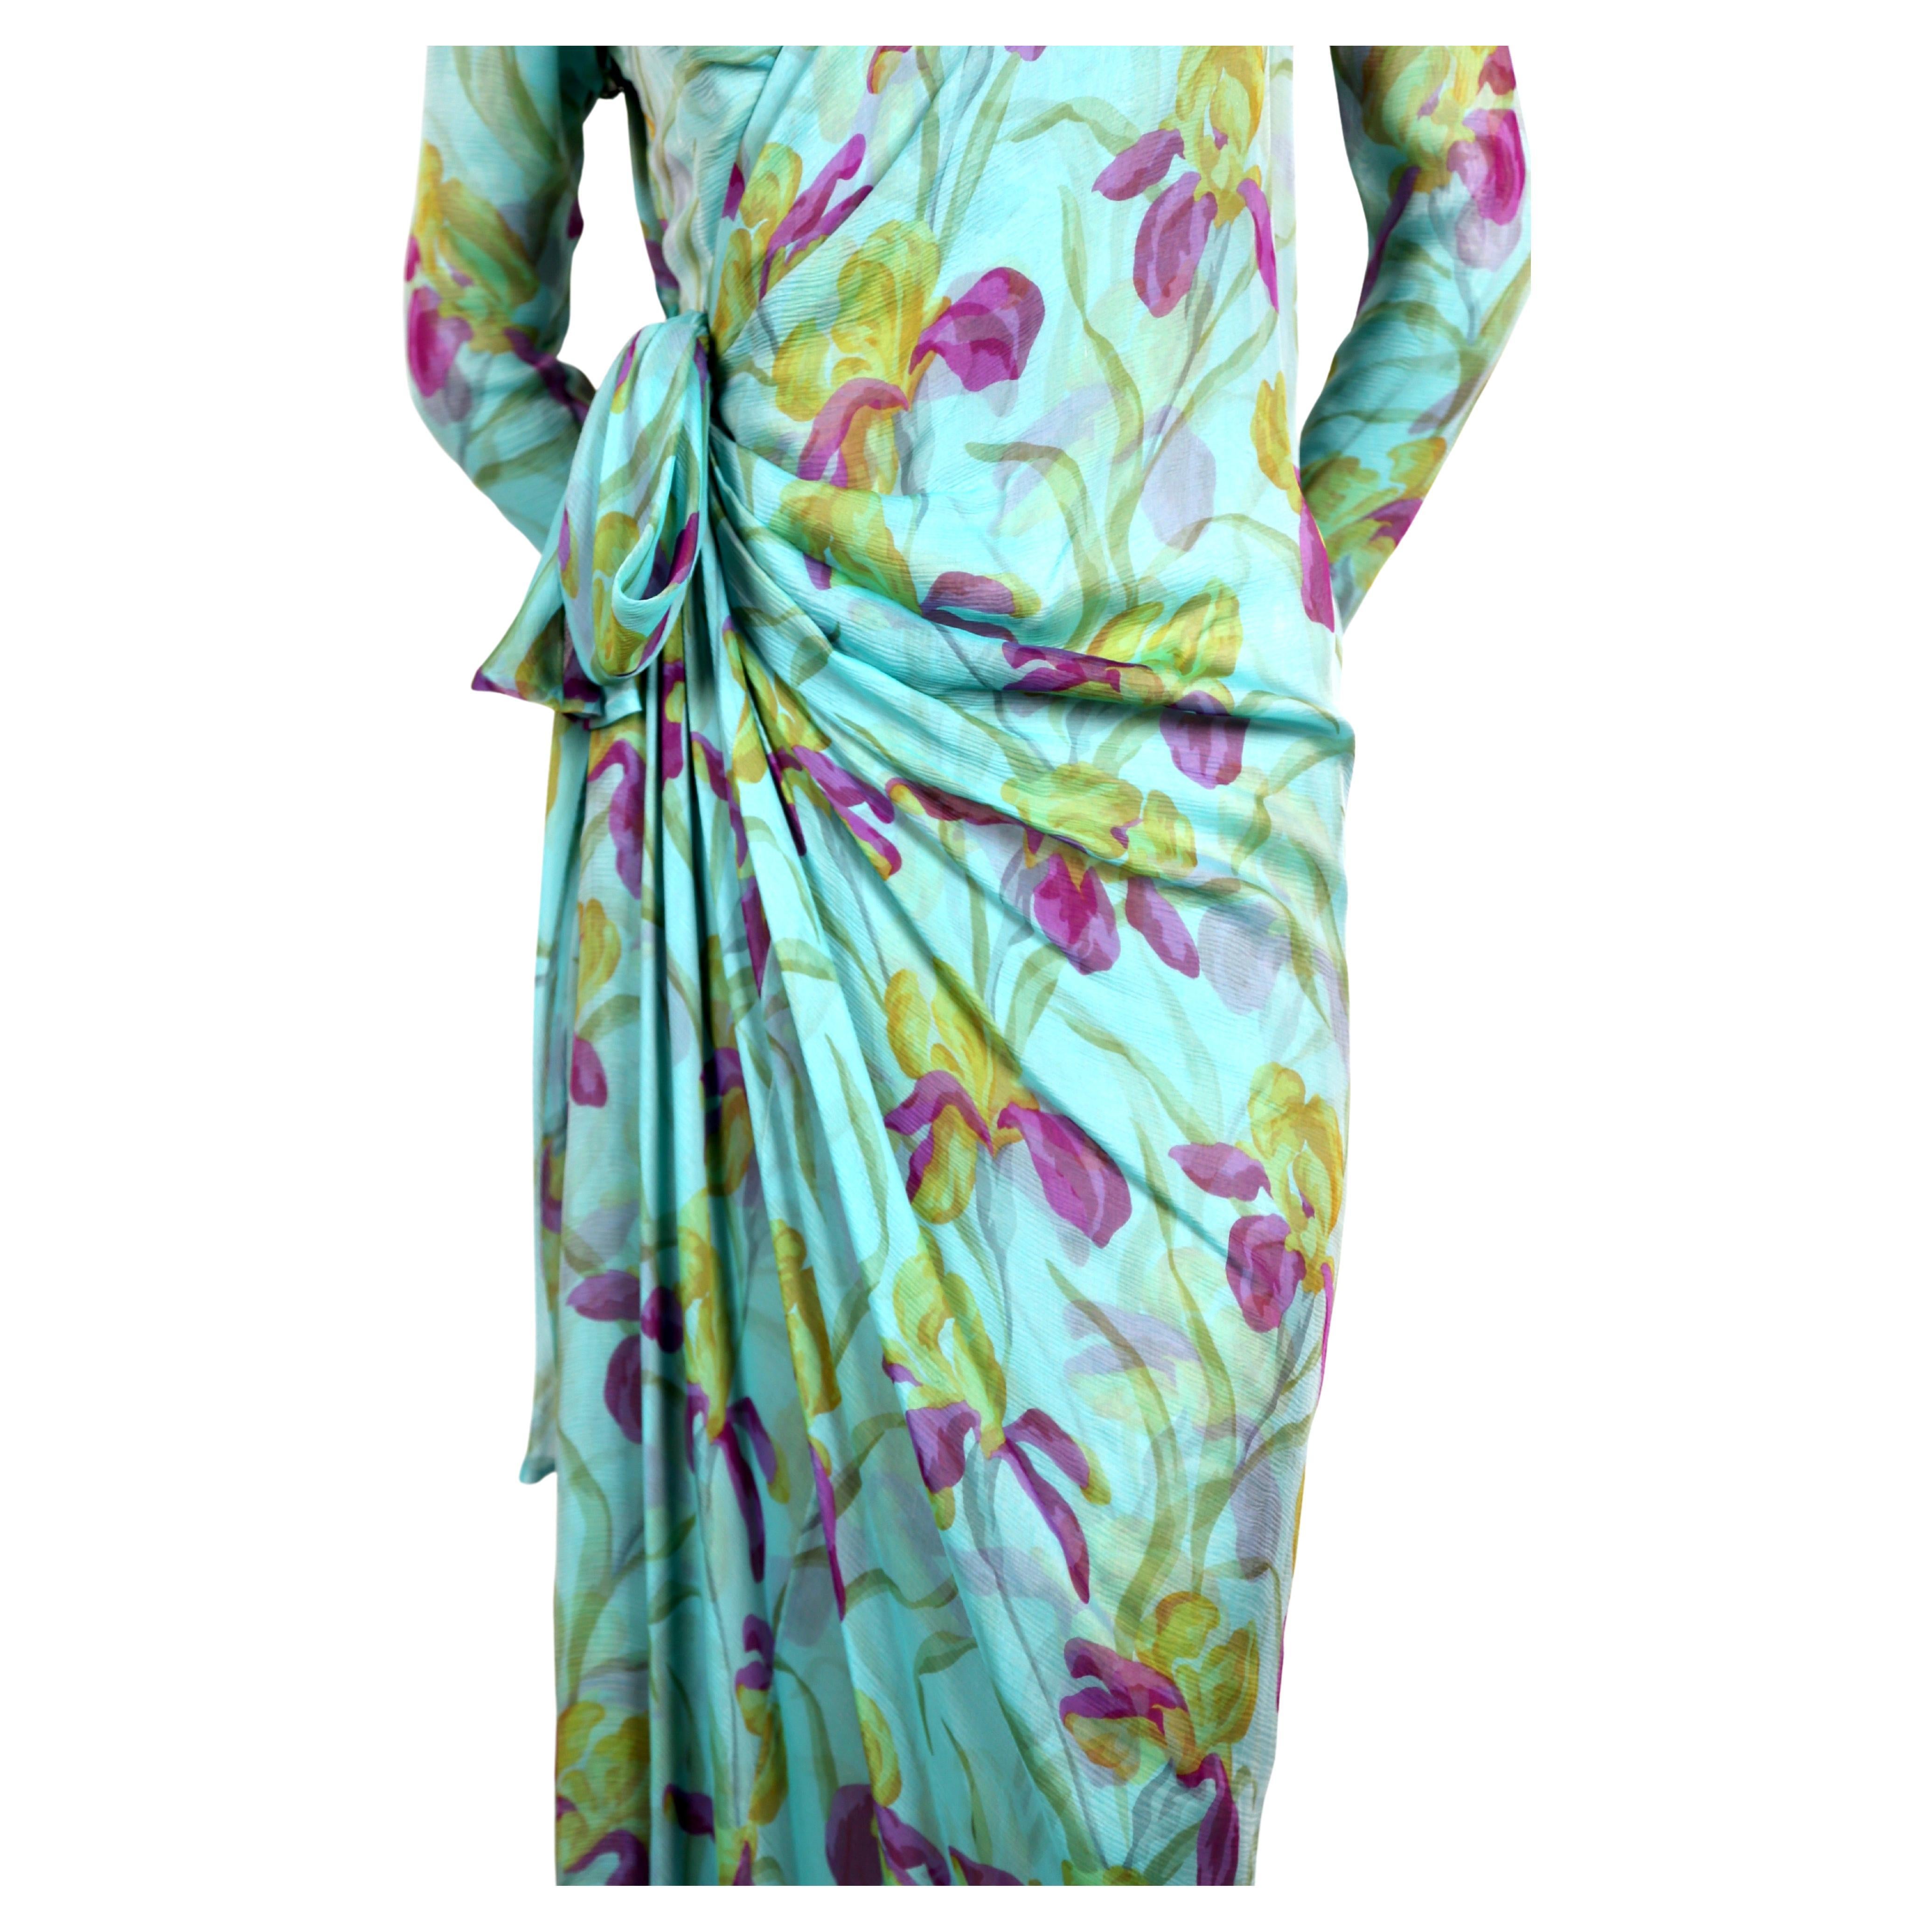 Very rare, floral-printed, silk mousseline, haute couture dress designed by Yves Saint Laurent dating to 1990 as seen on the spring couture runway in a different print. Dress best fits a size 4-6. Approximate measurements: shoulders 15